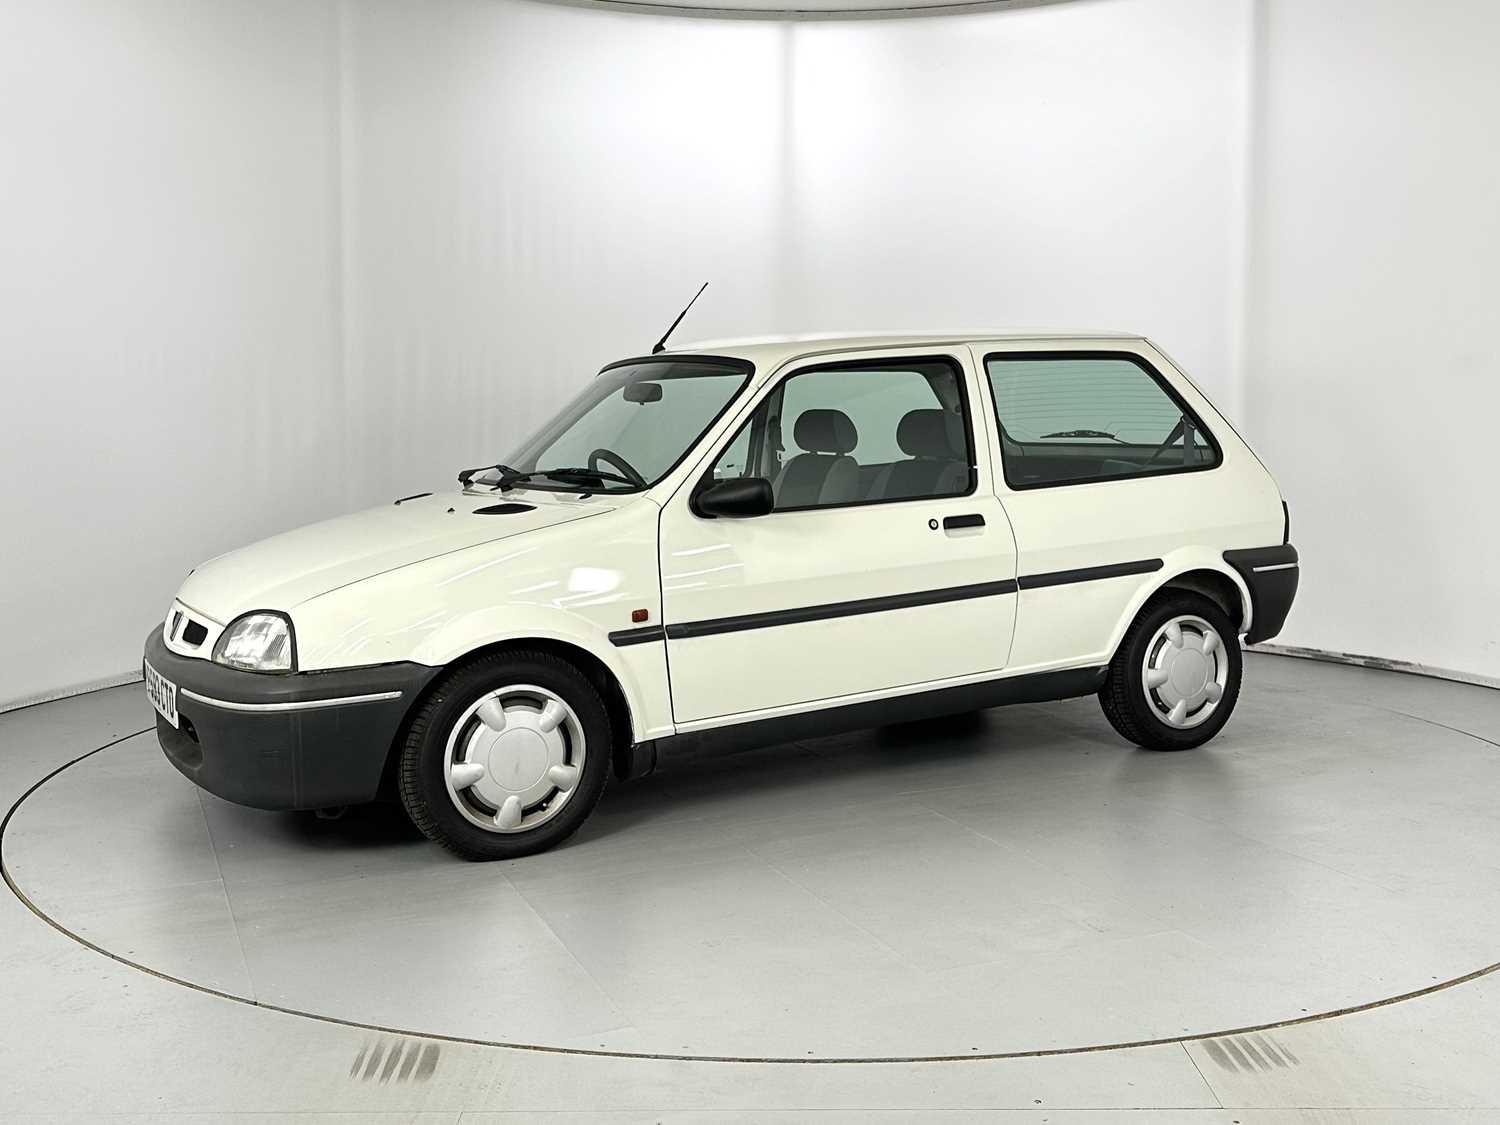 1996 Rover Metro - NO RESERVE 13,000 miles! - Image 4 of 29